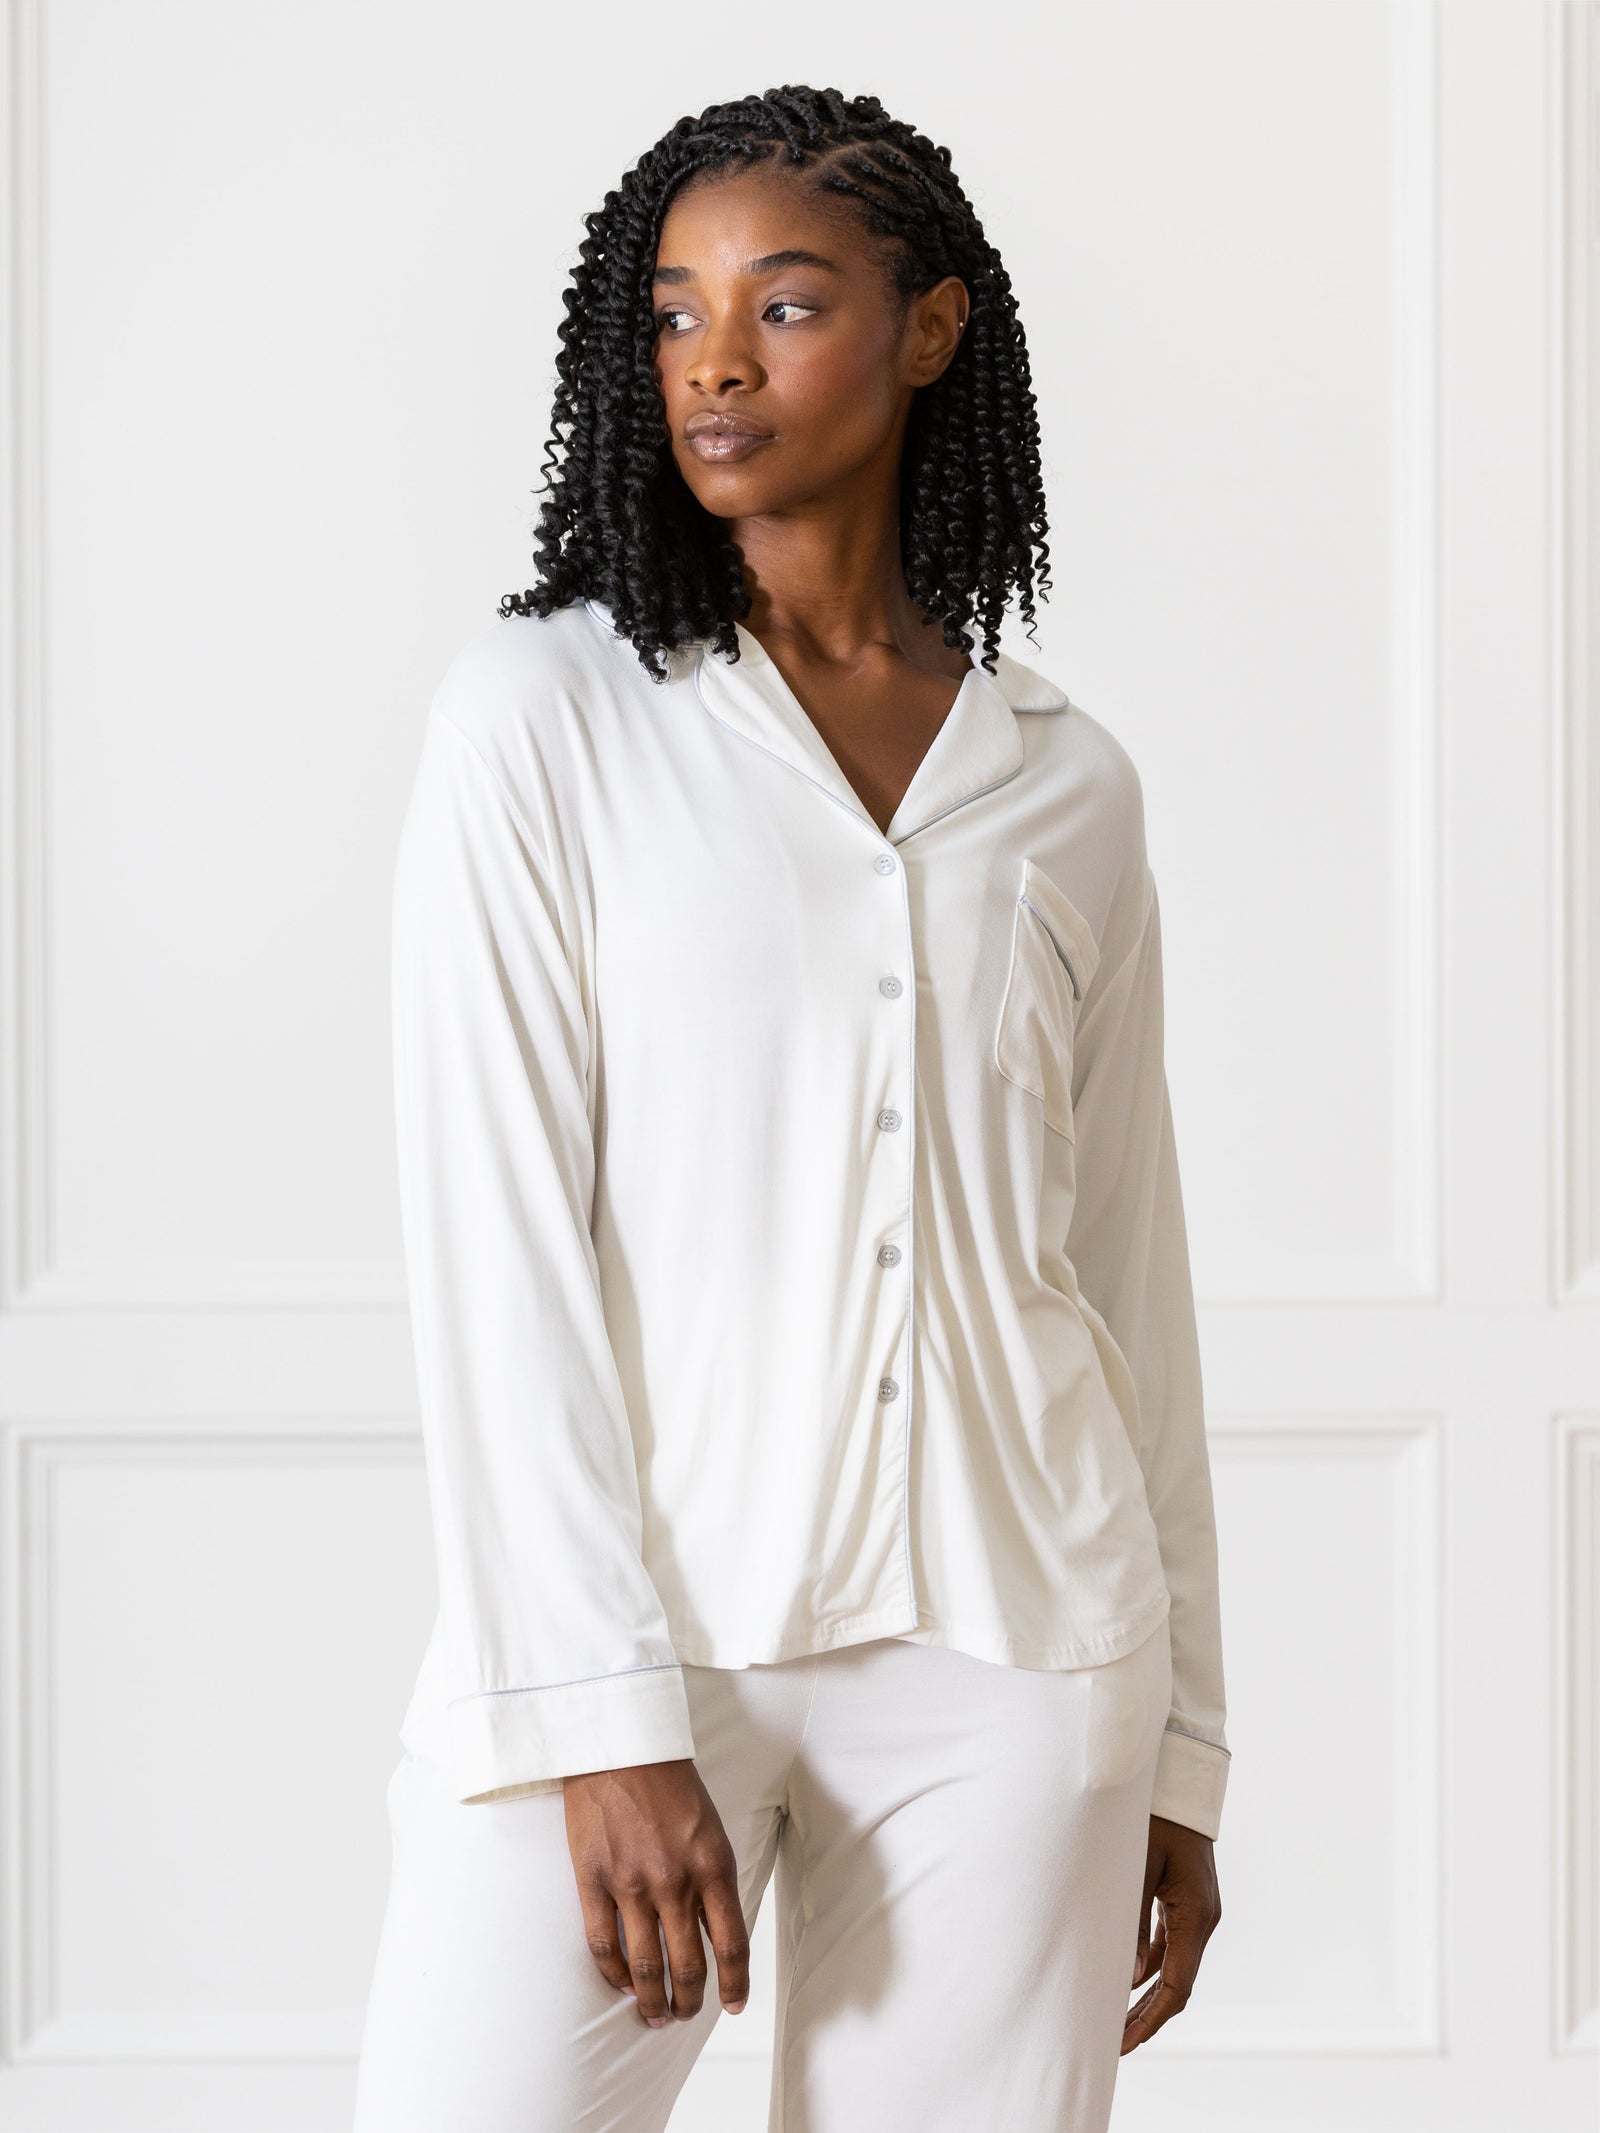 Ivory Long Sleeve Pajama Set modeled by a woman. The photo was taken in a high contrast setting, showing off the colors and lines of the pajamas. 